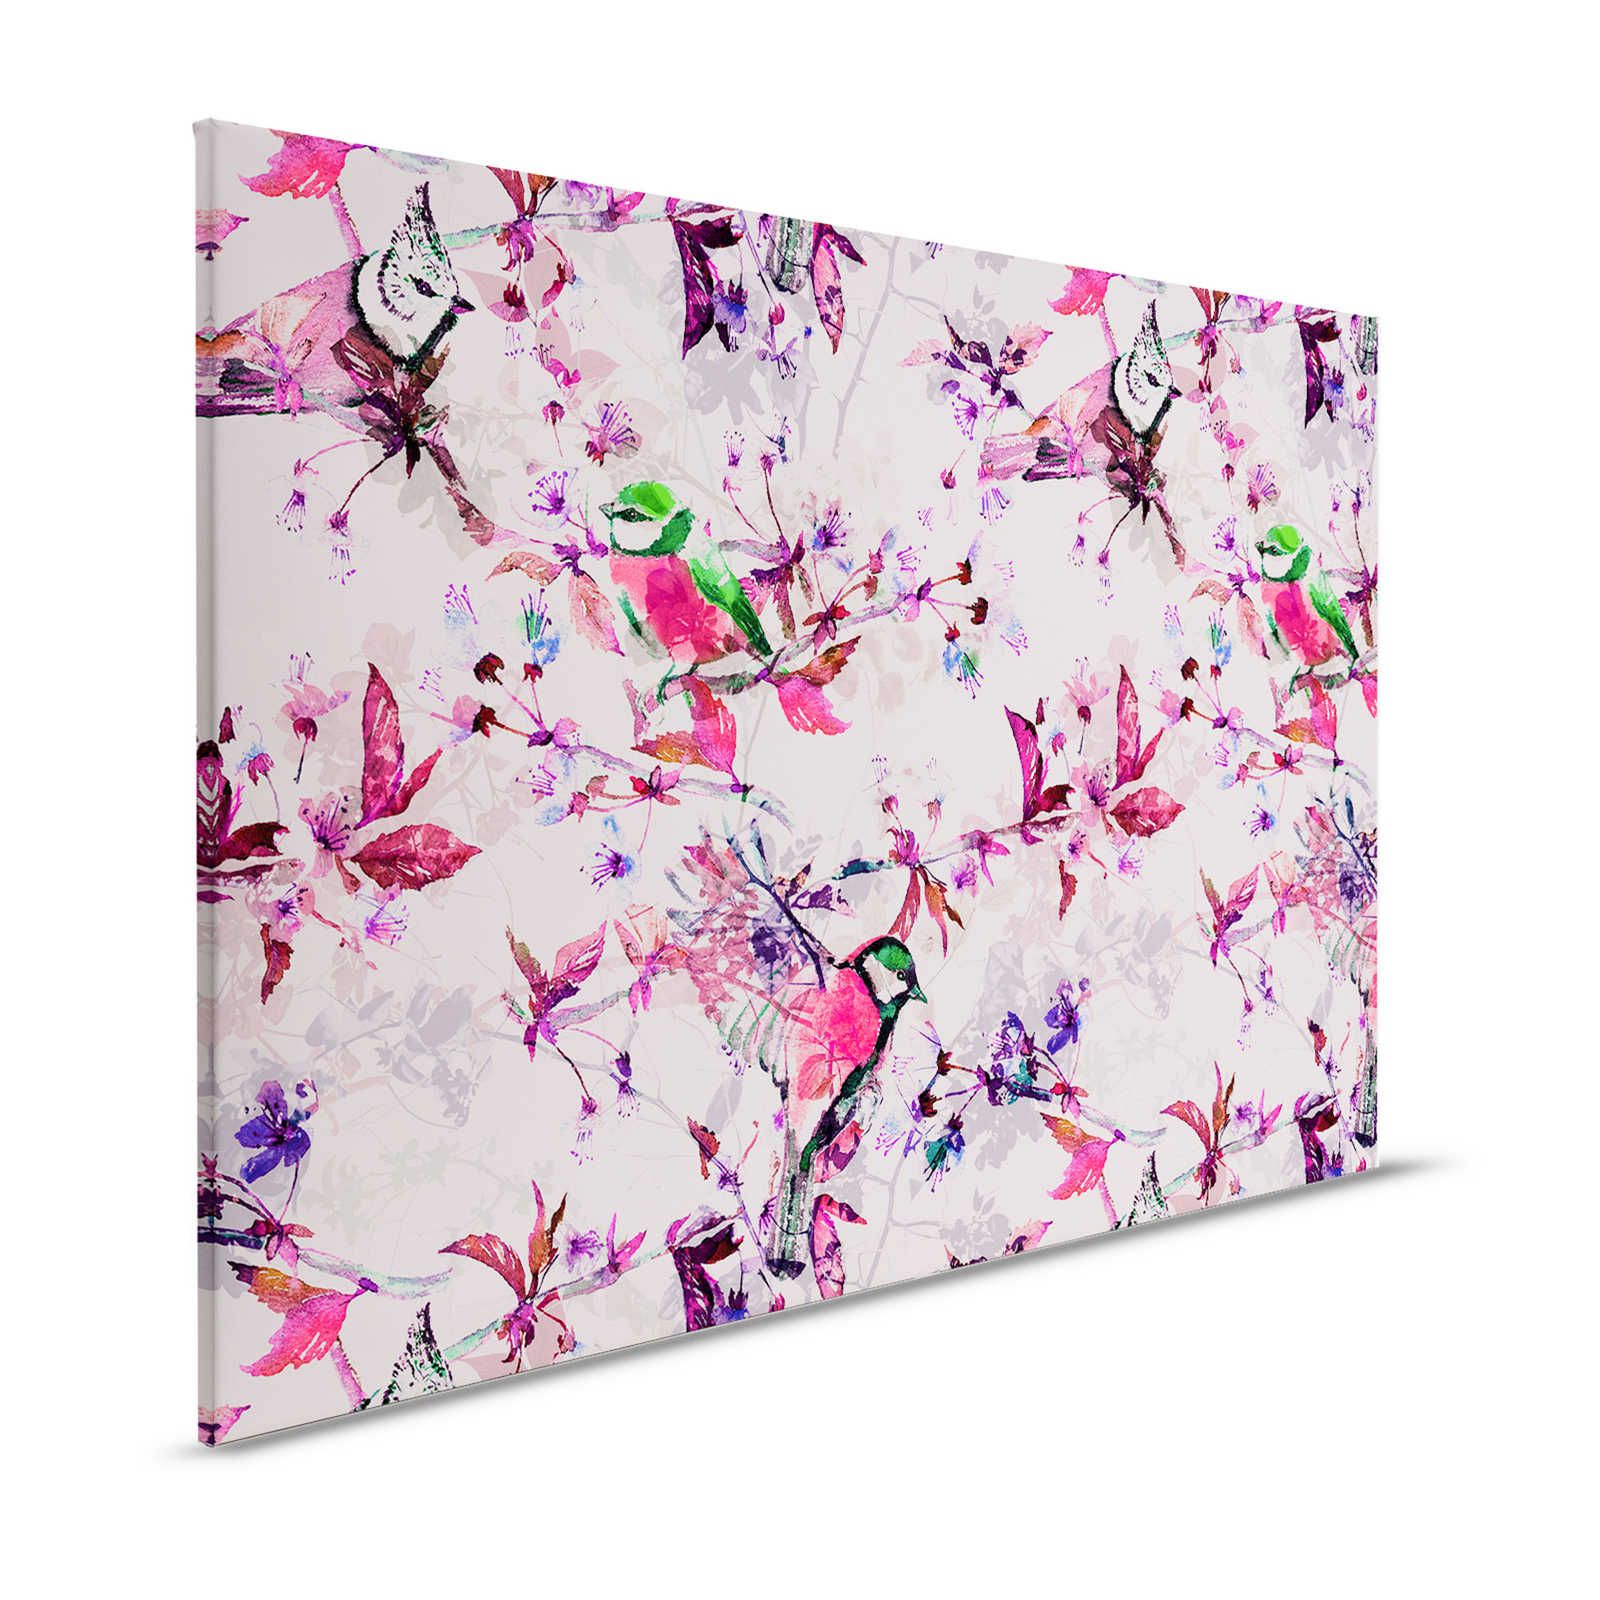 Birds Collage Style Canvas Painting | pink, blue - 1.20 m x 0.80 m
